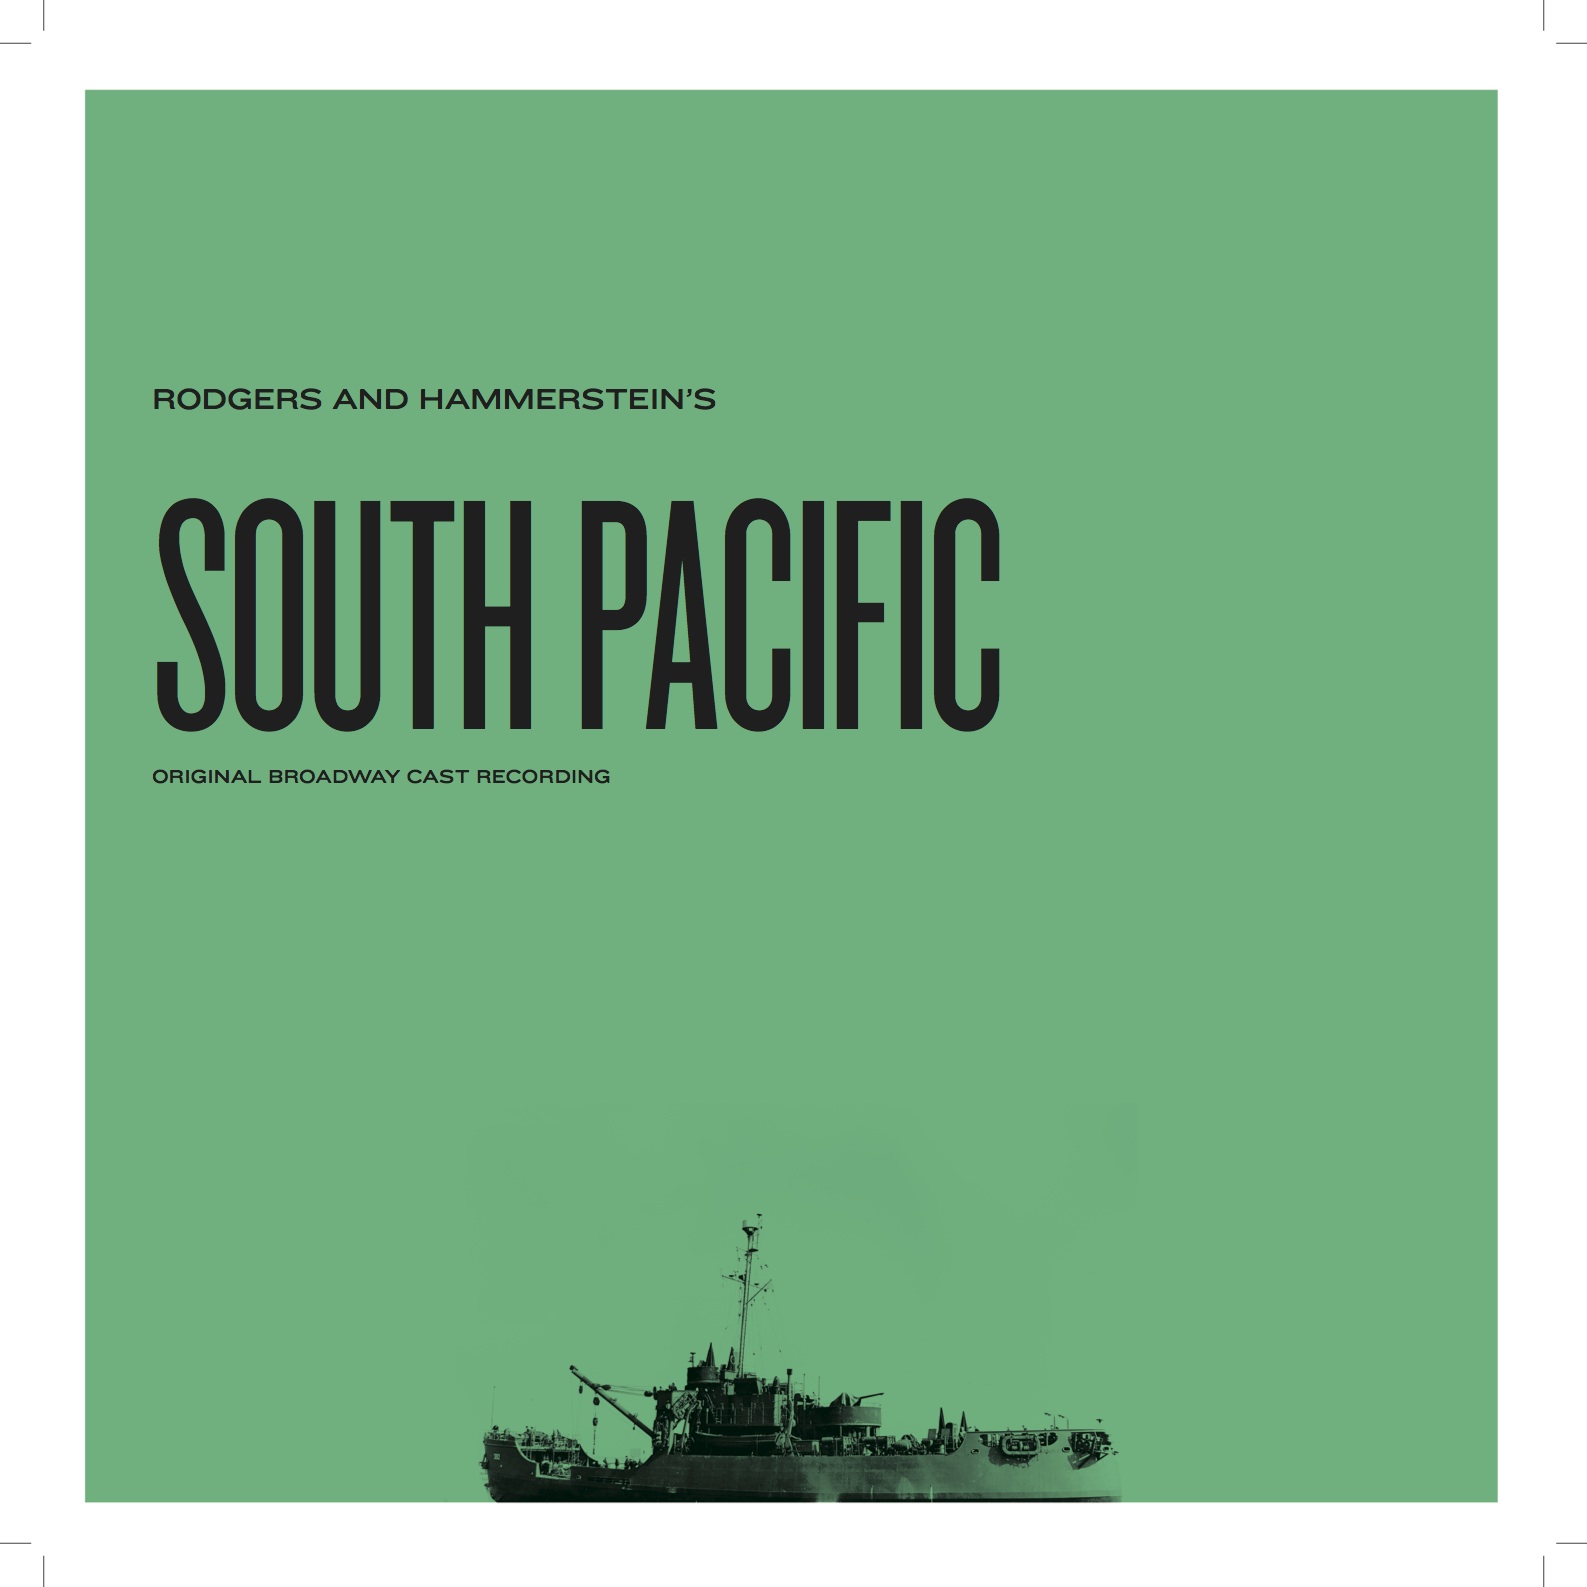 Rogers and Hammerstein “South Pacific”